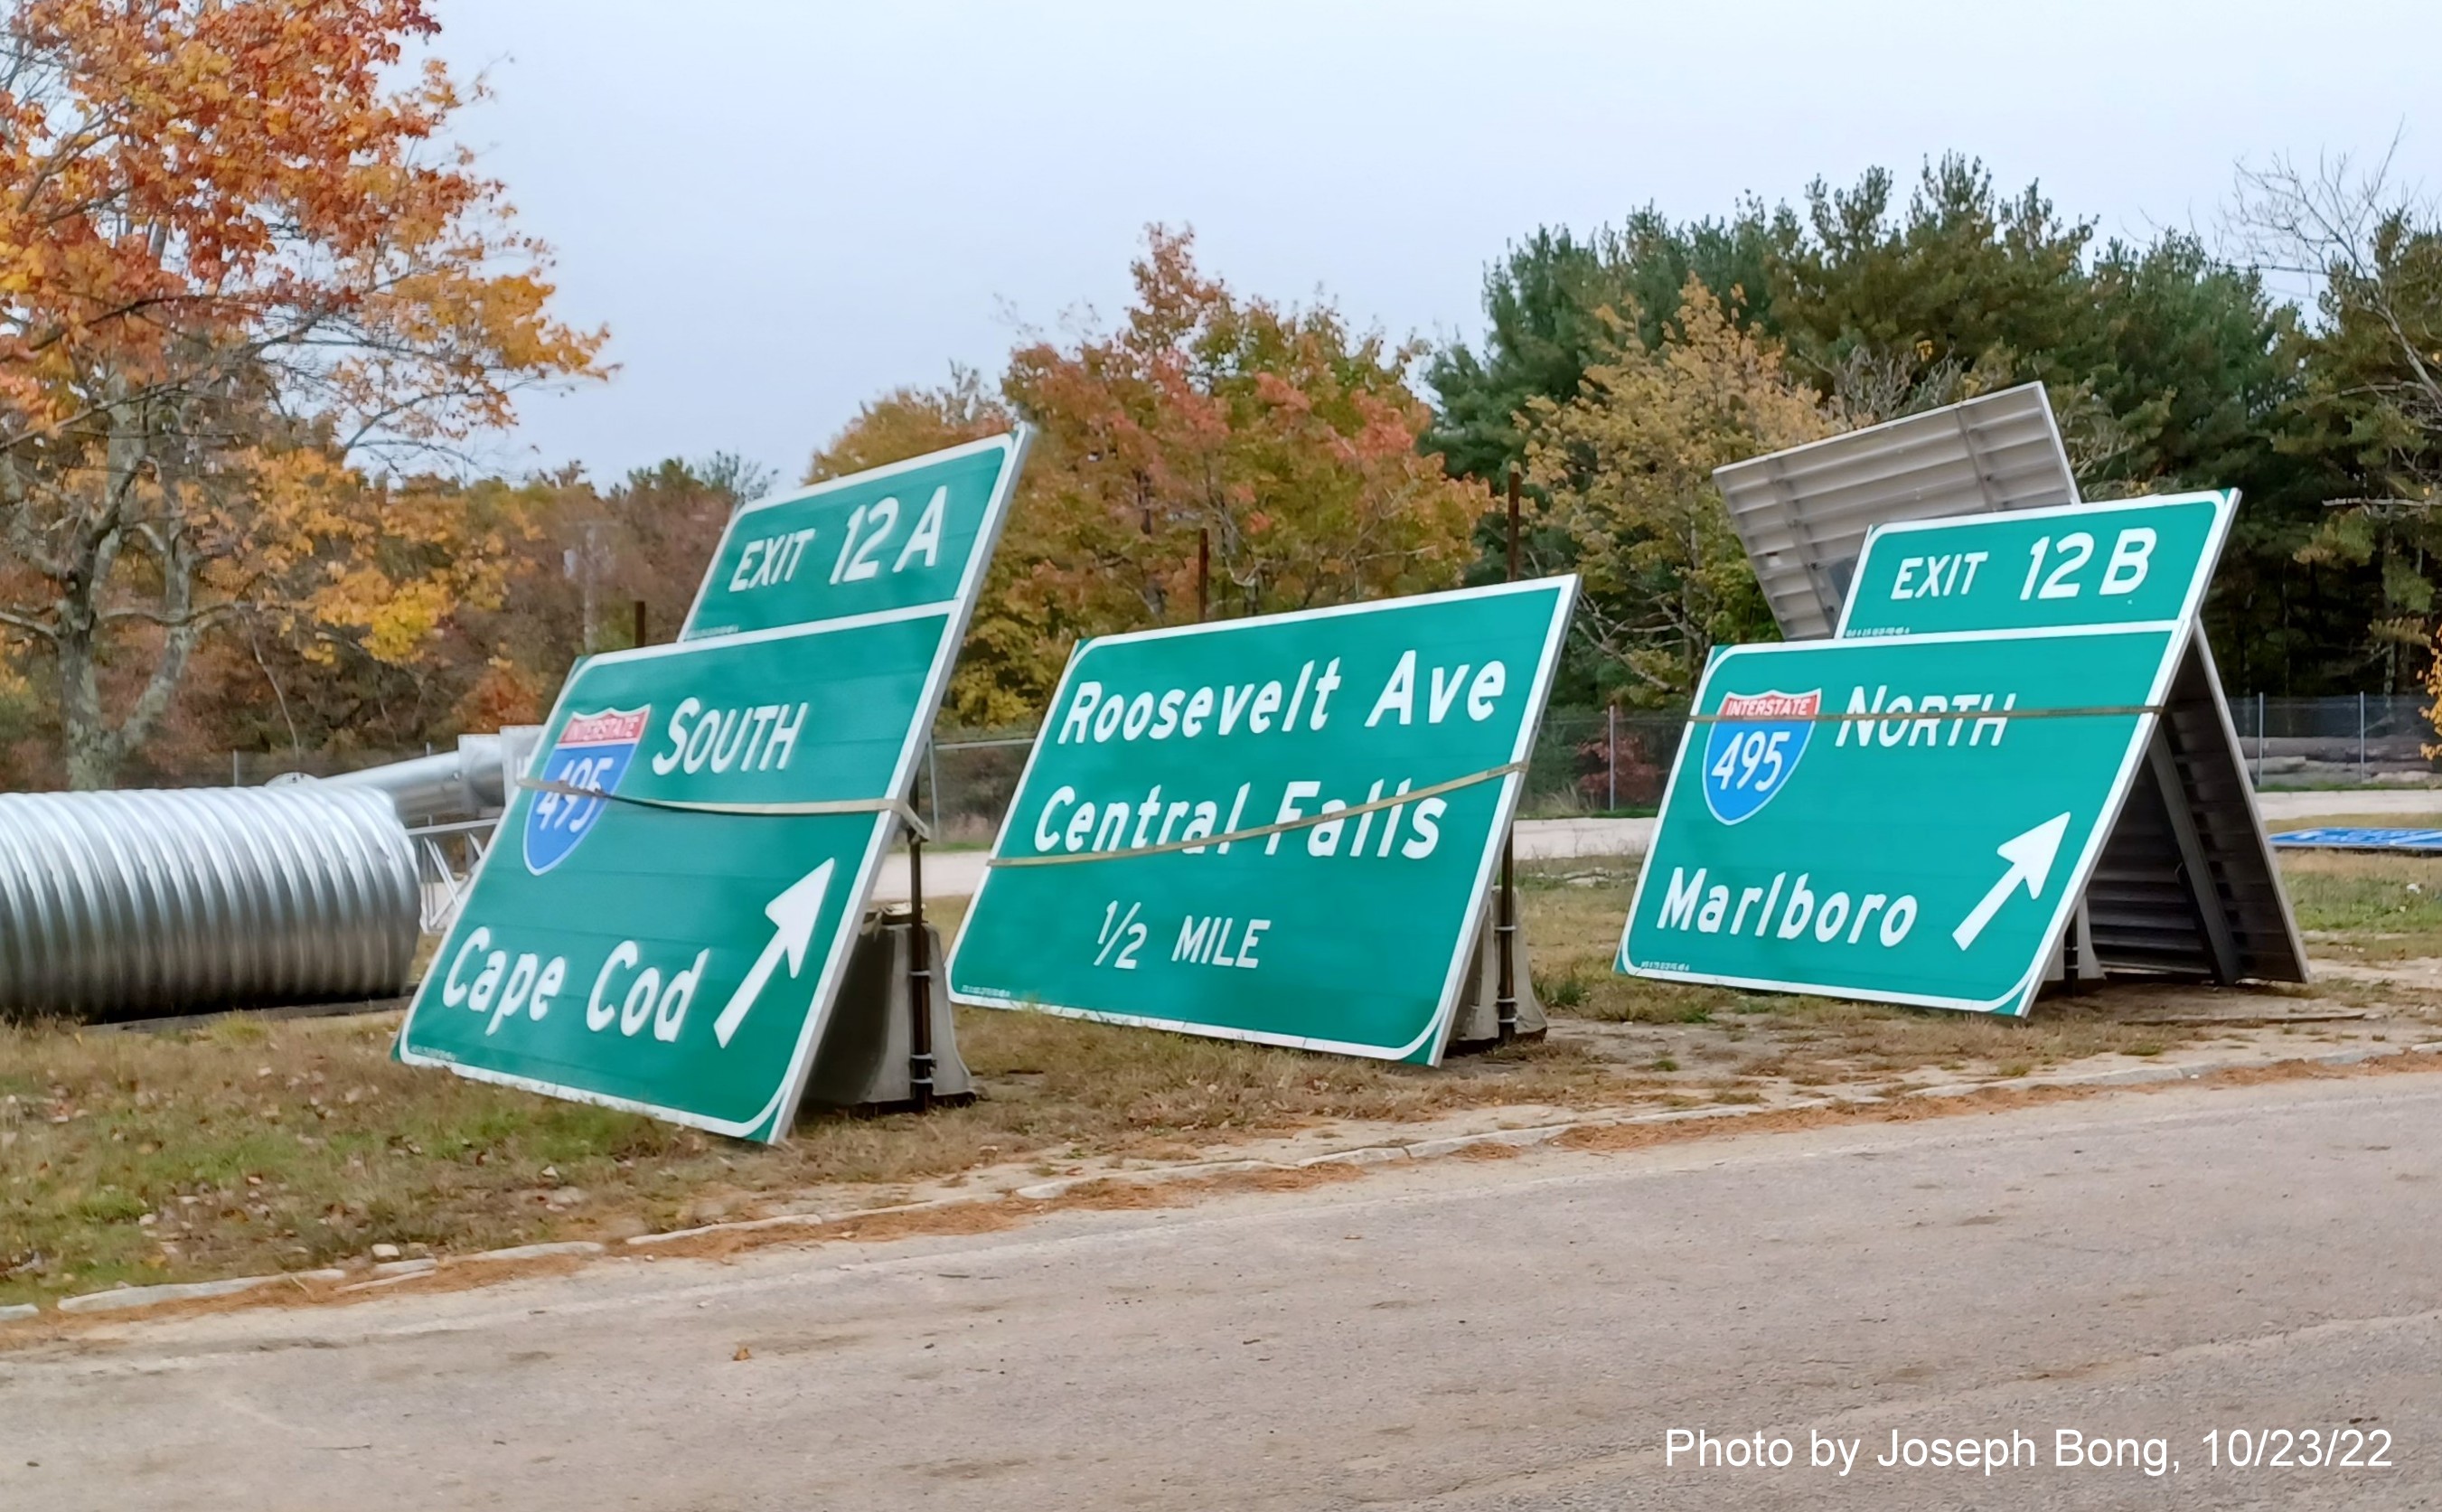 Image of yet to be placed overhead signs for I-95 sign replacement project being stored at Mansfield Rest Area on I-95 North, by Joseph Bong, October 2022